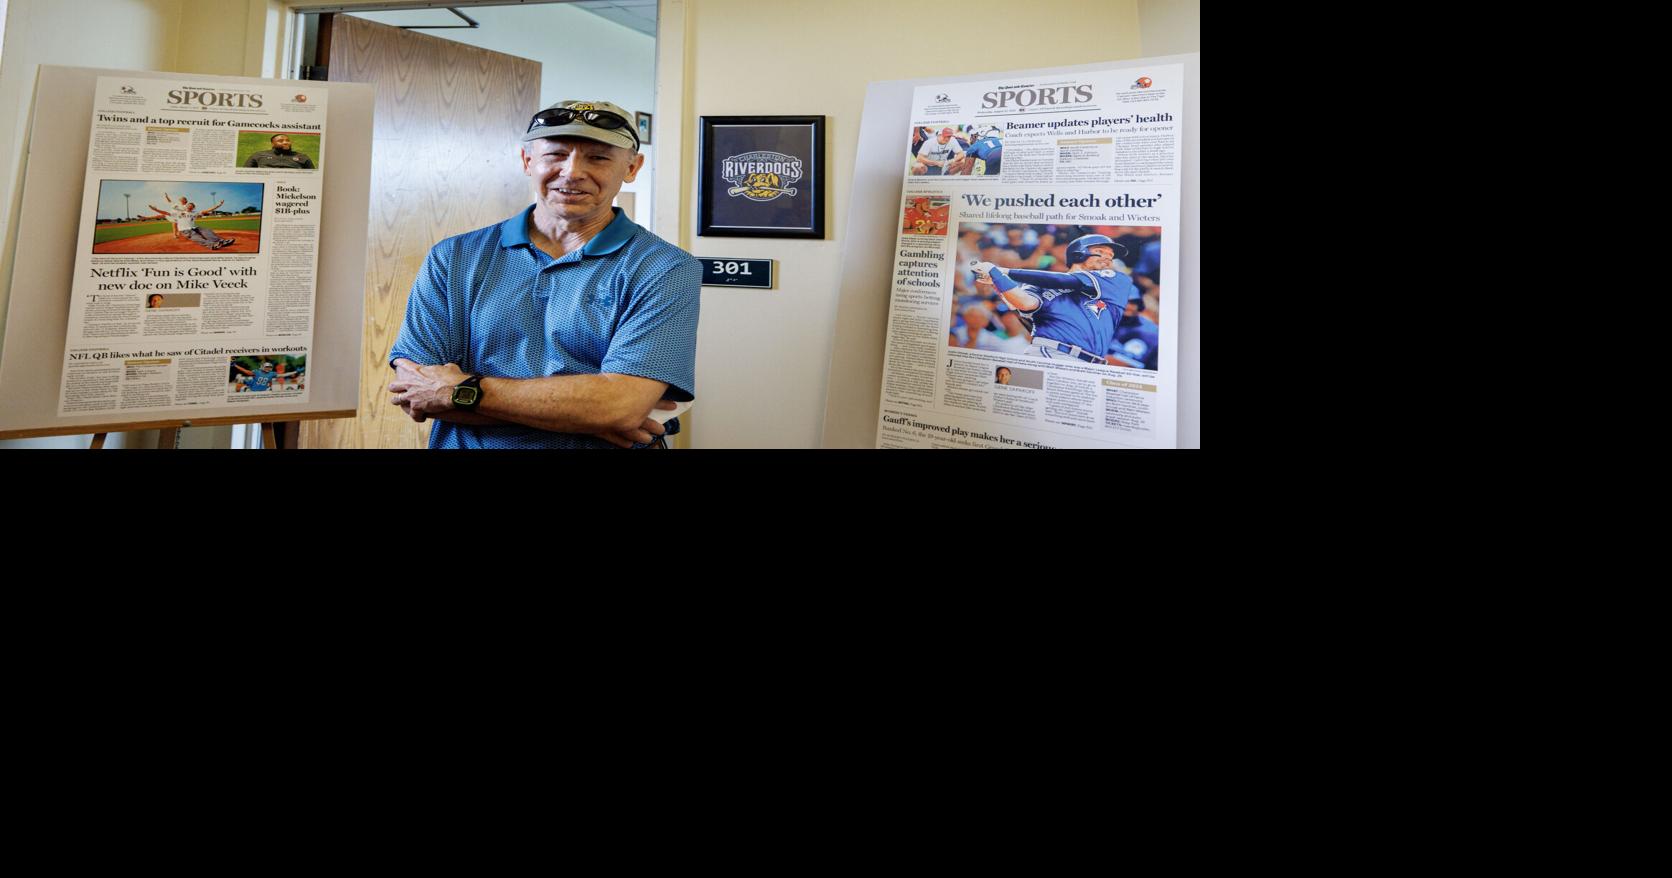 RiverDogs Pay Tribute to Post and Courier Sports Columnist